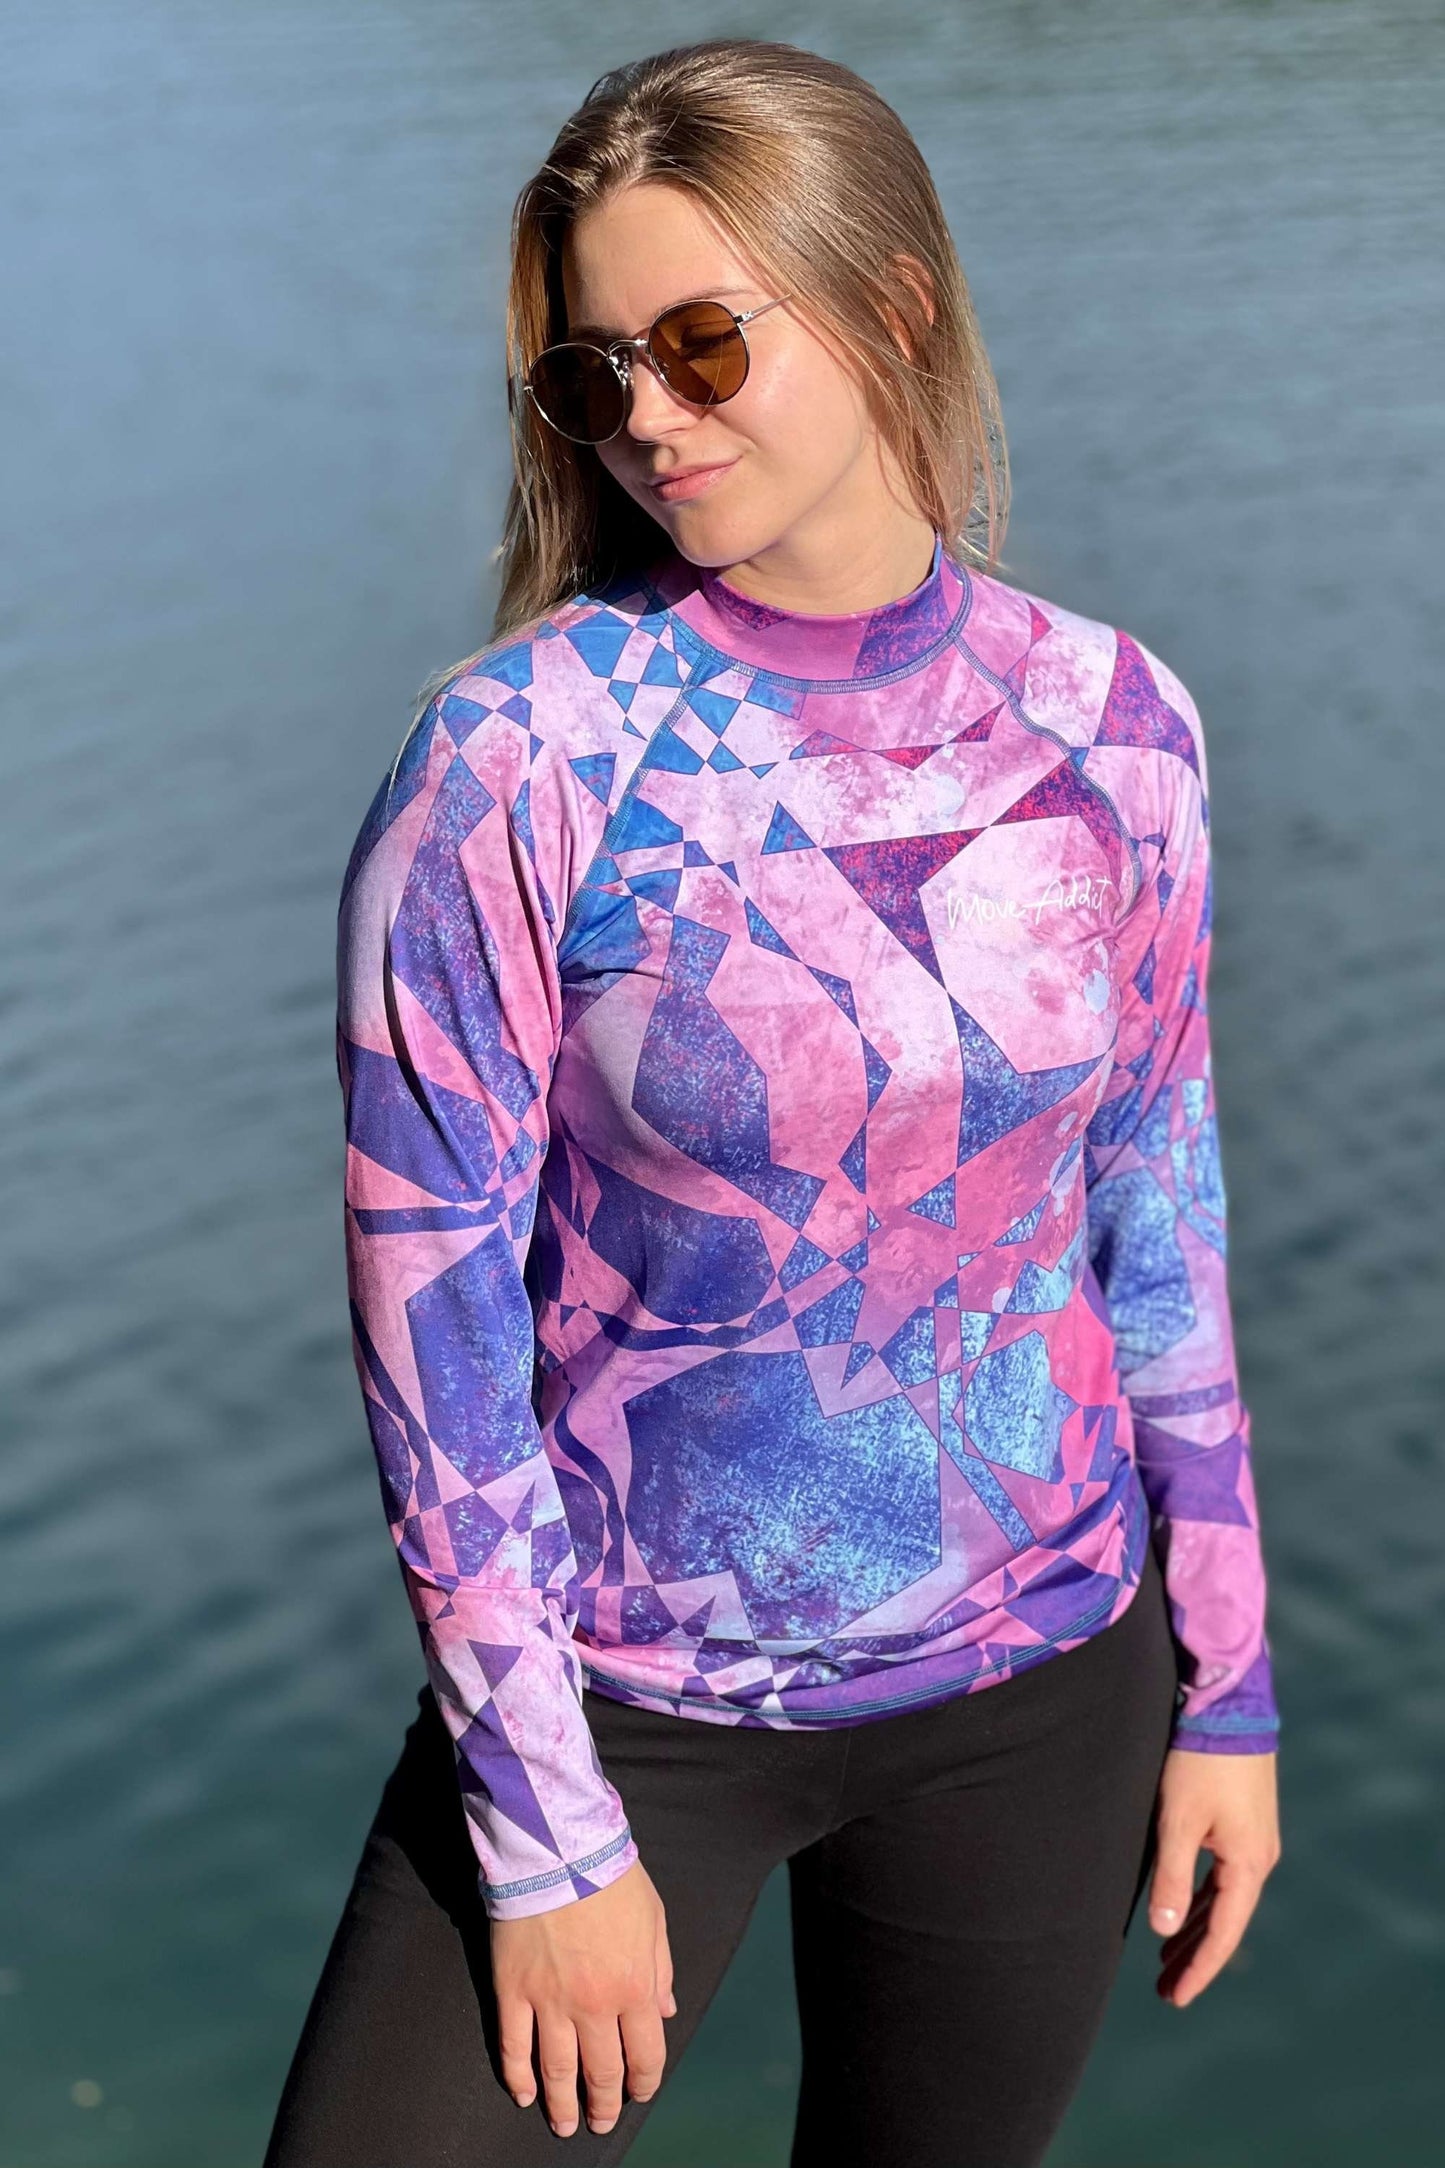 Women's Long Sleeve Rash Guard for Water Sports| Women's Lycra| Summer water sports outfit| Active lifestyle| Sun and wind protection